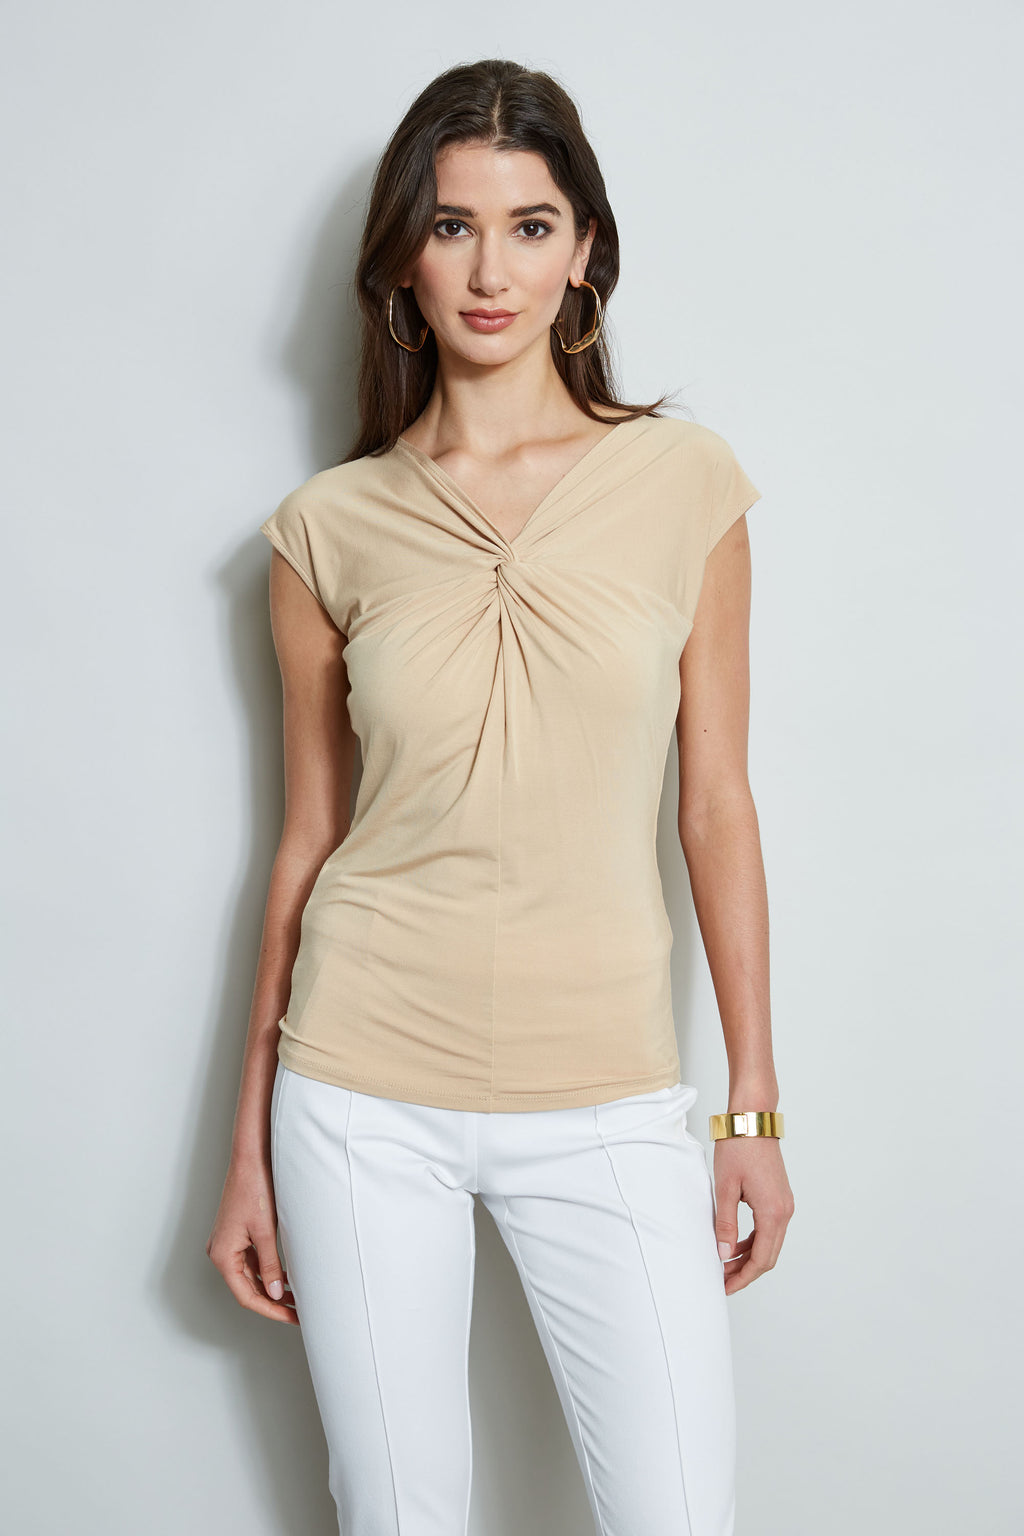 Tahari ASL Women's Cap Sleeve V-Neck Twist Front Top, Ivory, XS at   Women's Clothing store